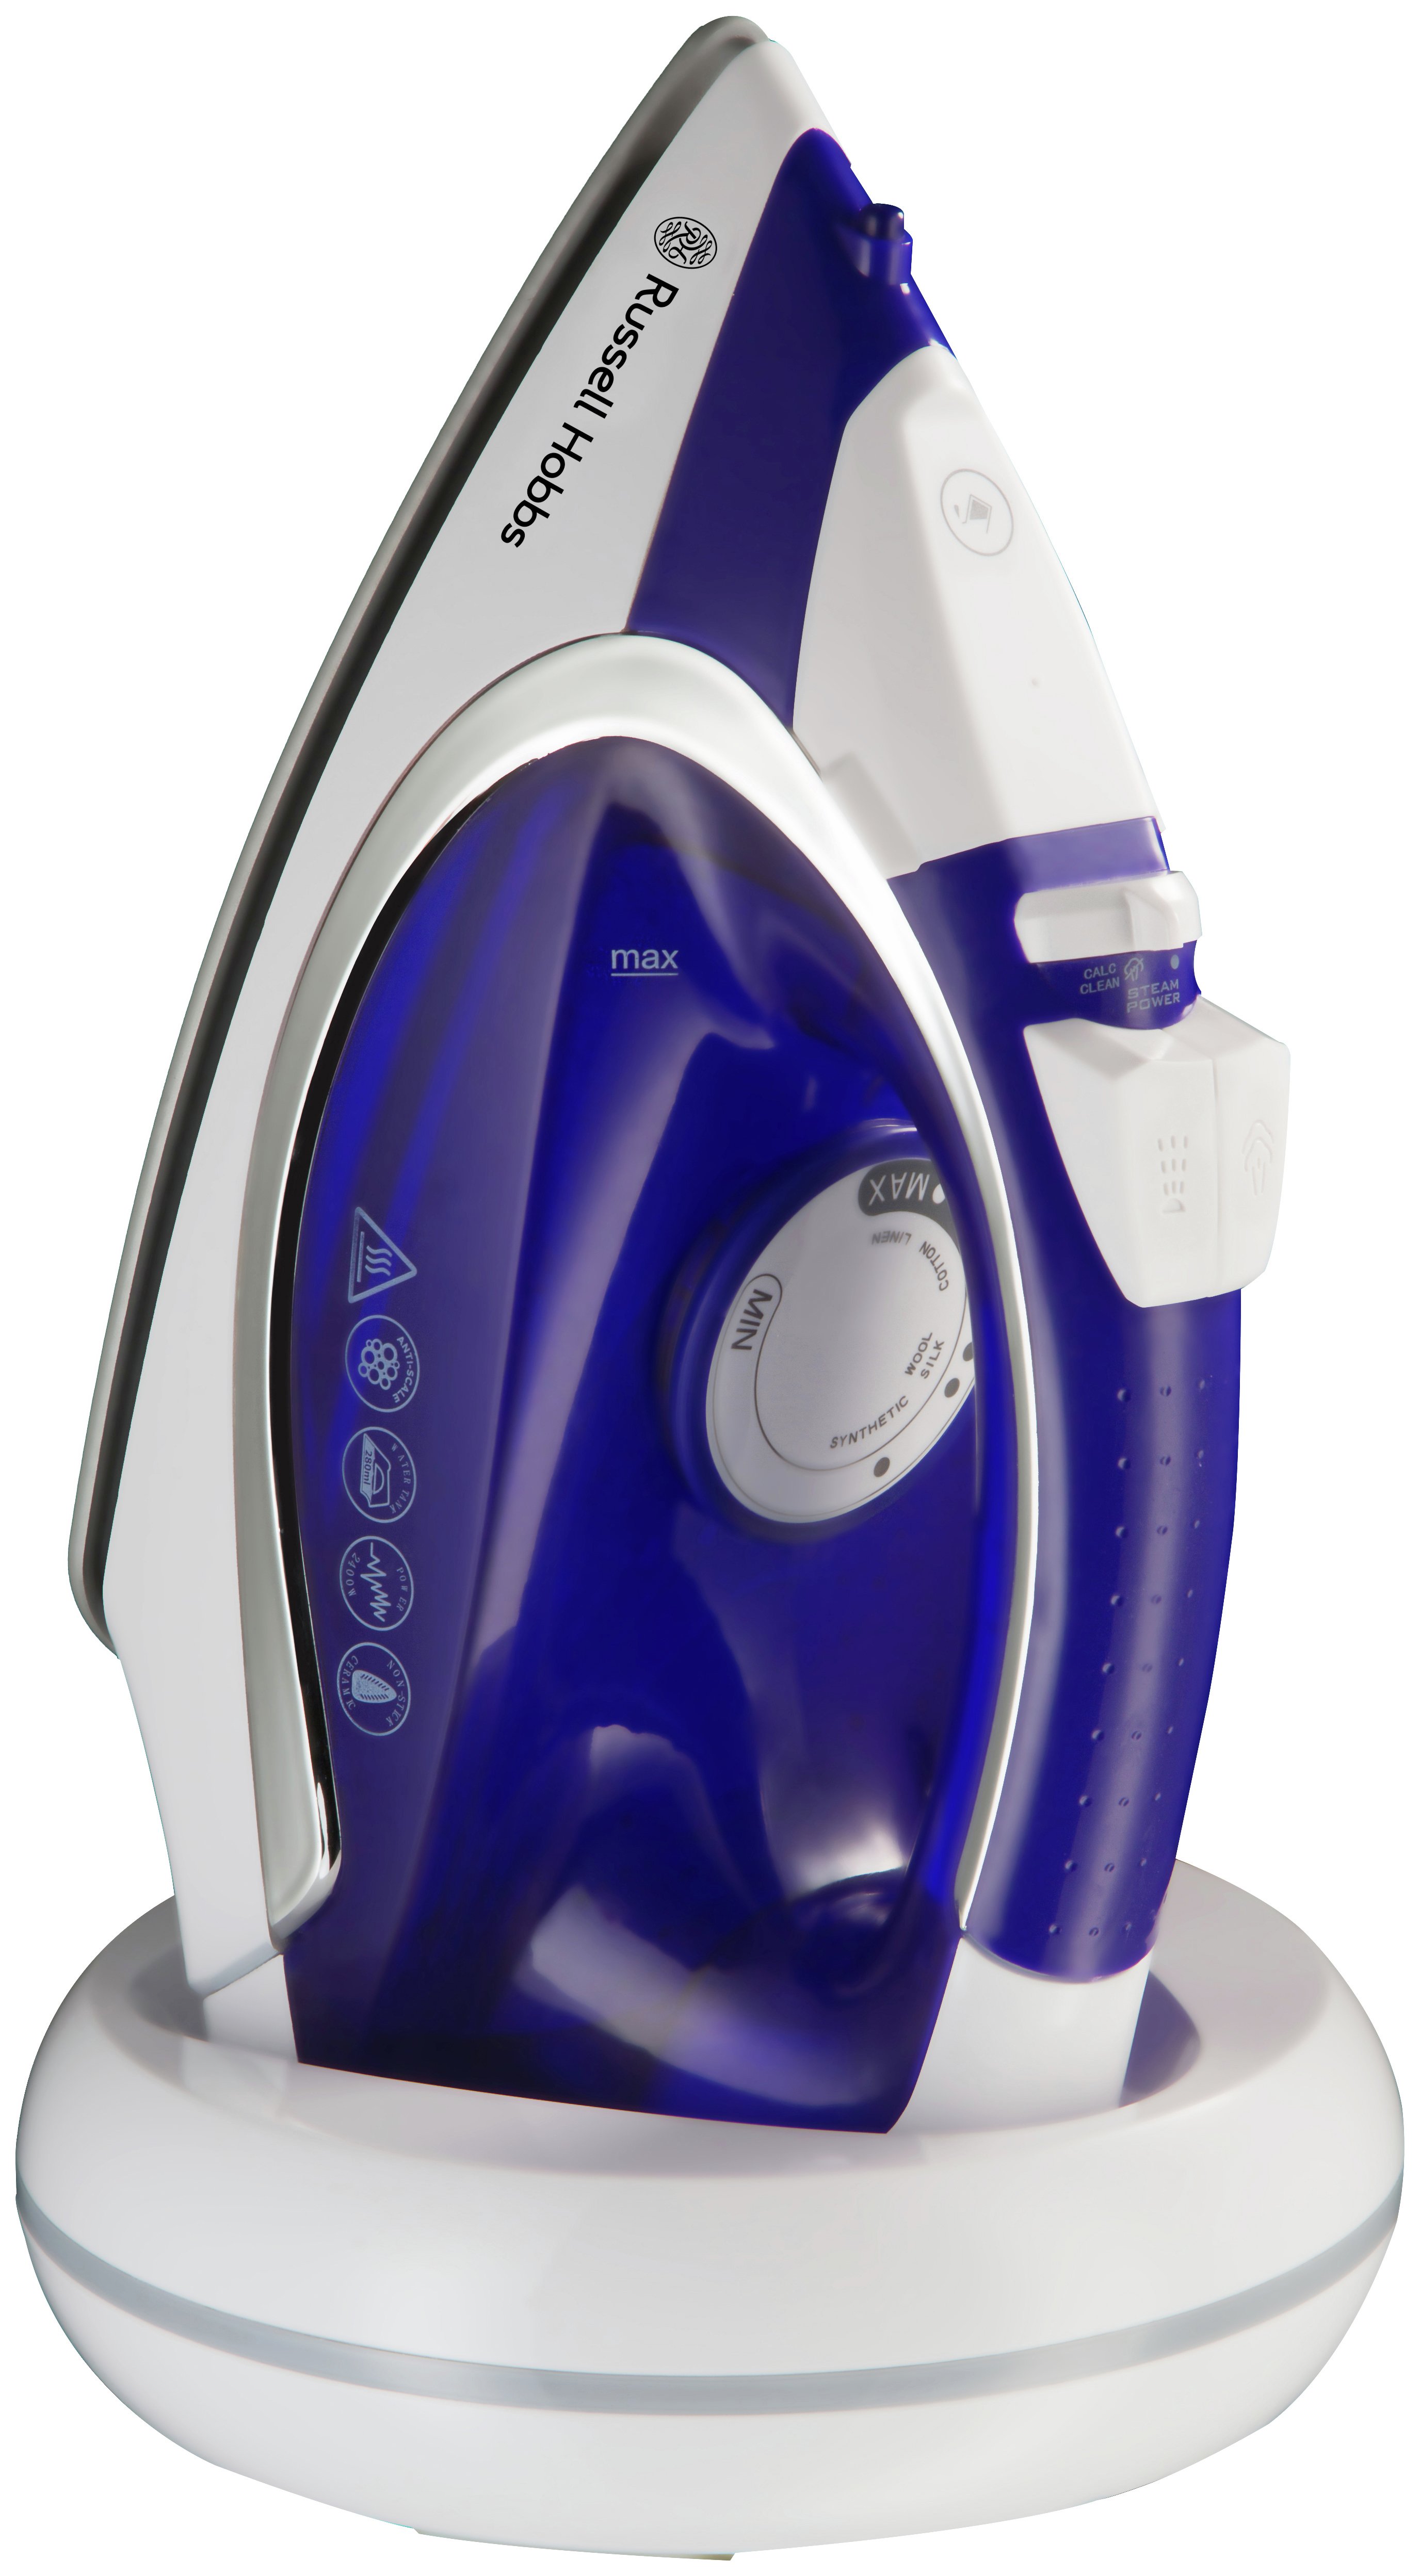 russell hobbs colour control steam iron instructions